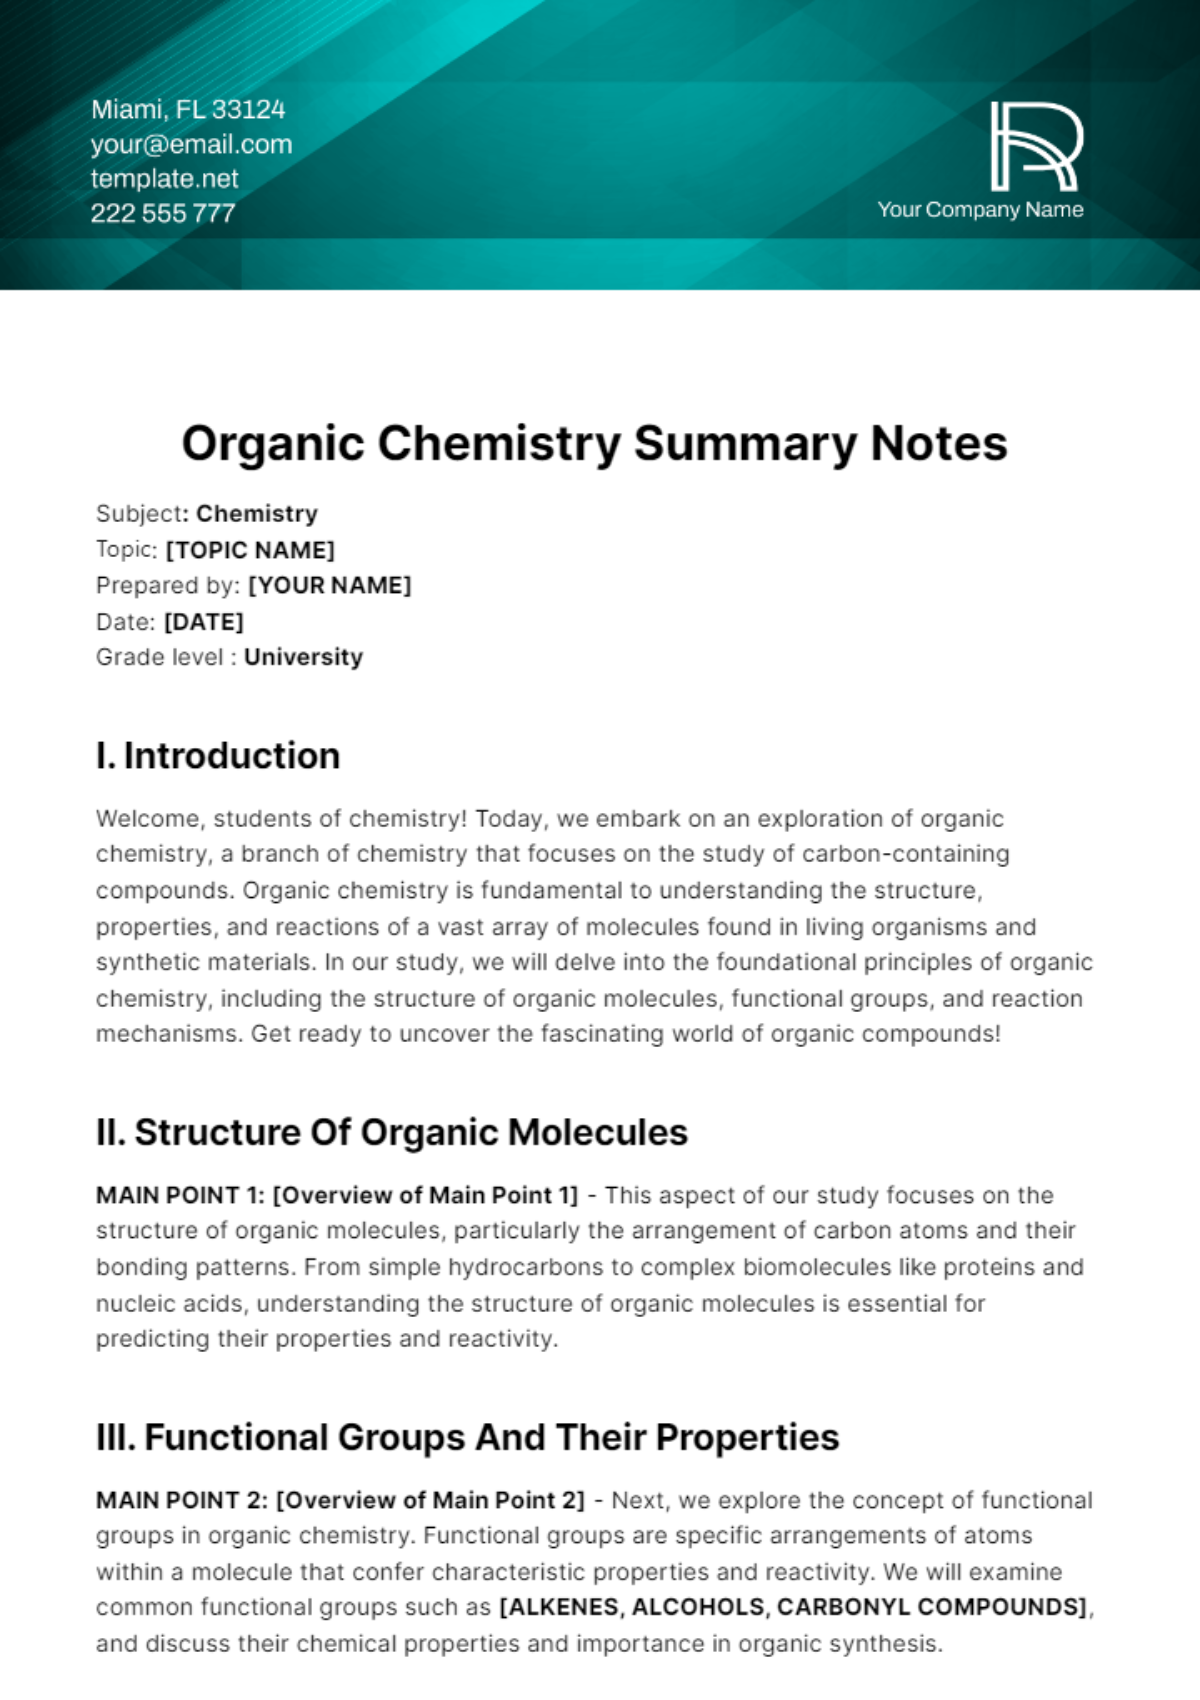 Free Organic Chemistry Summary Notes Template